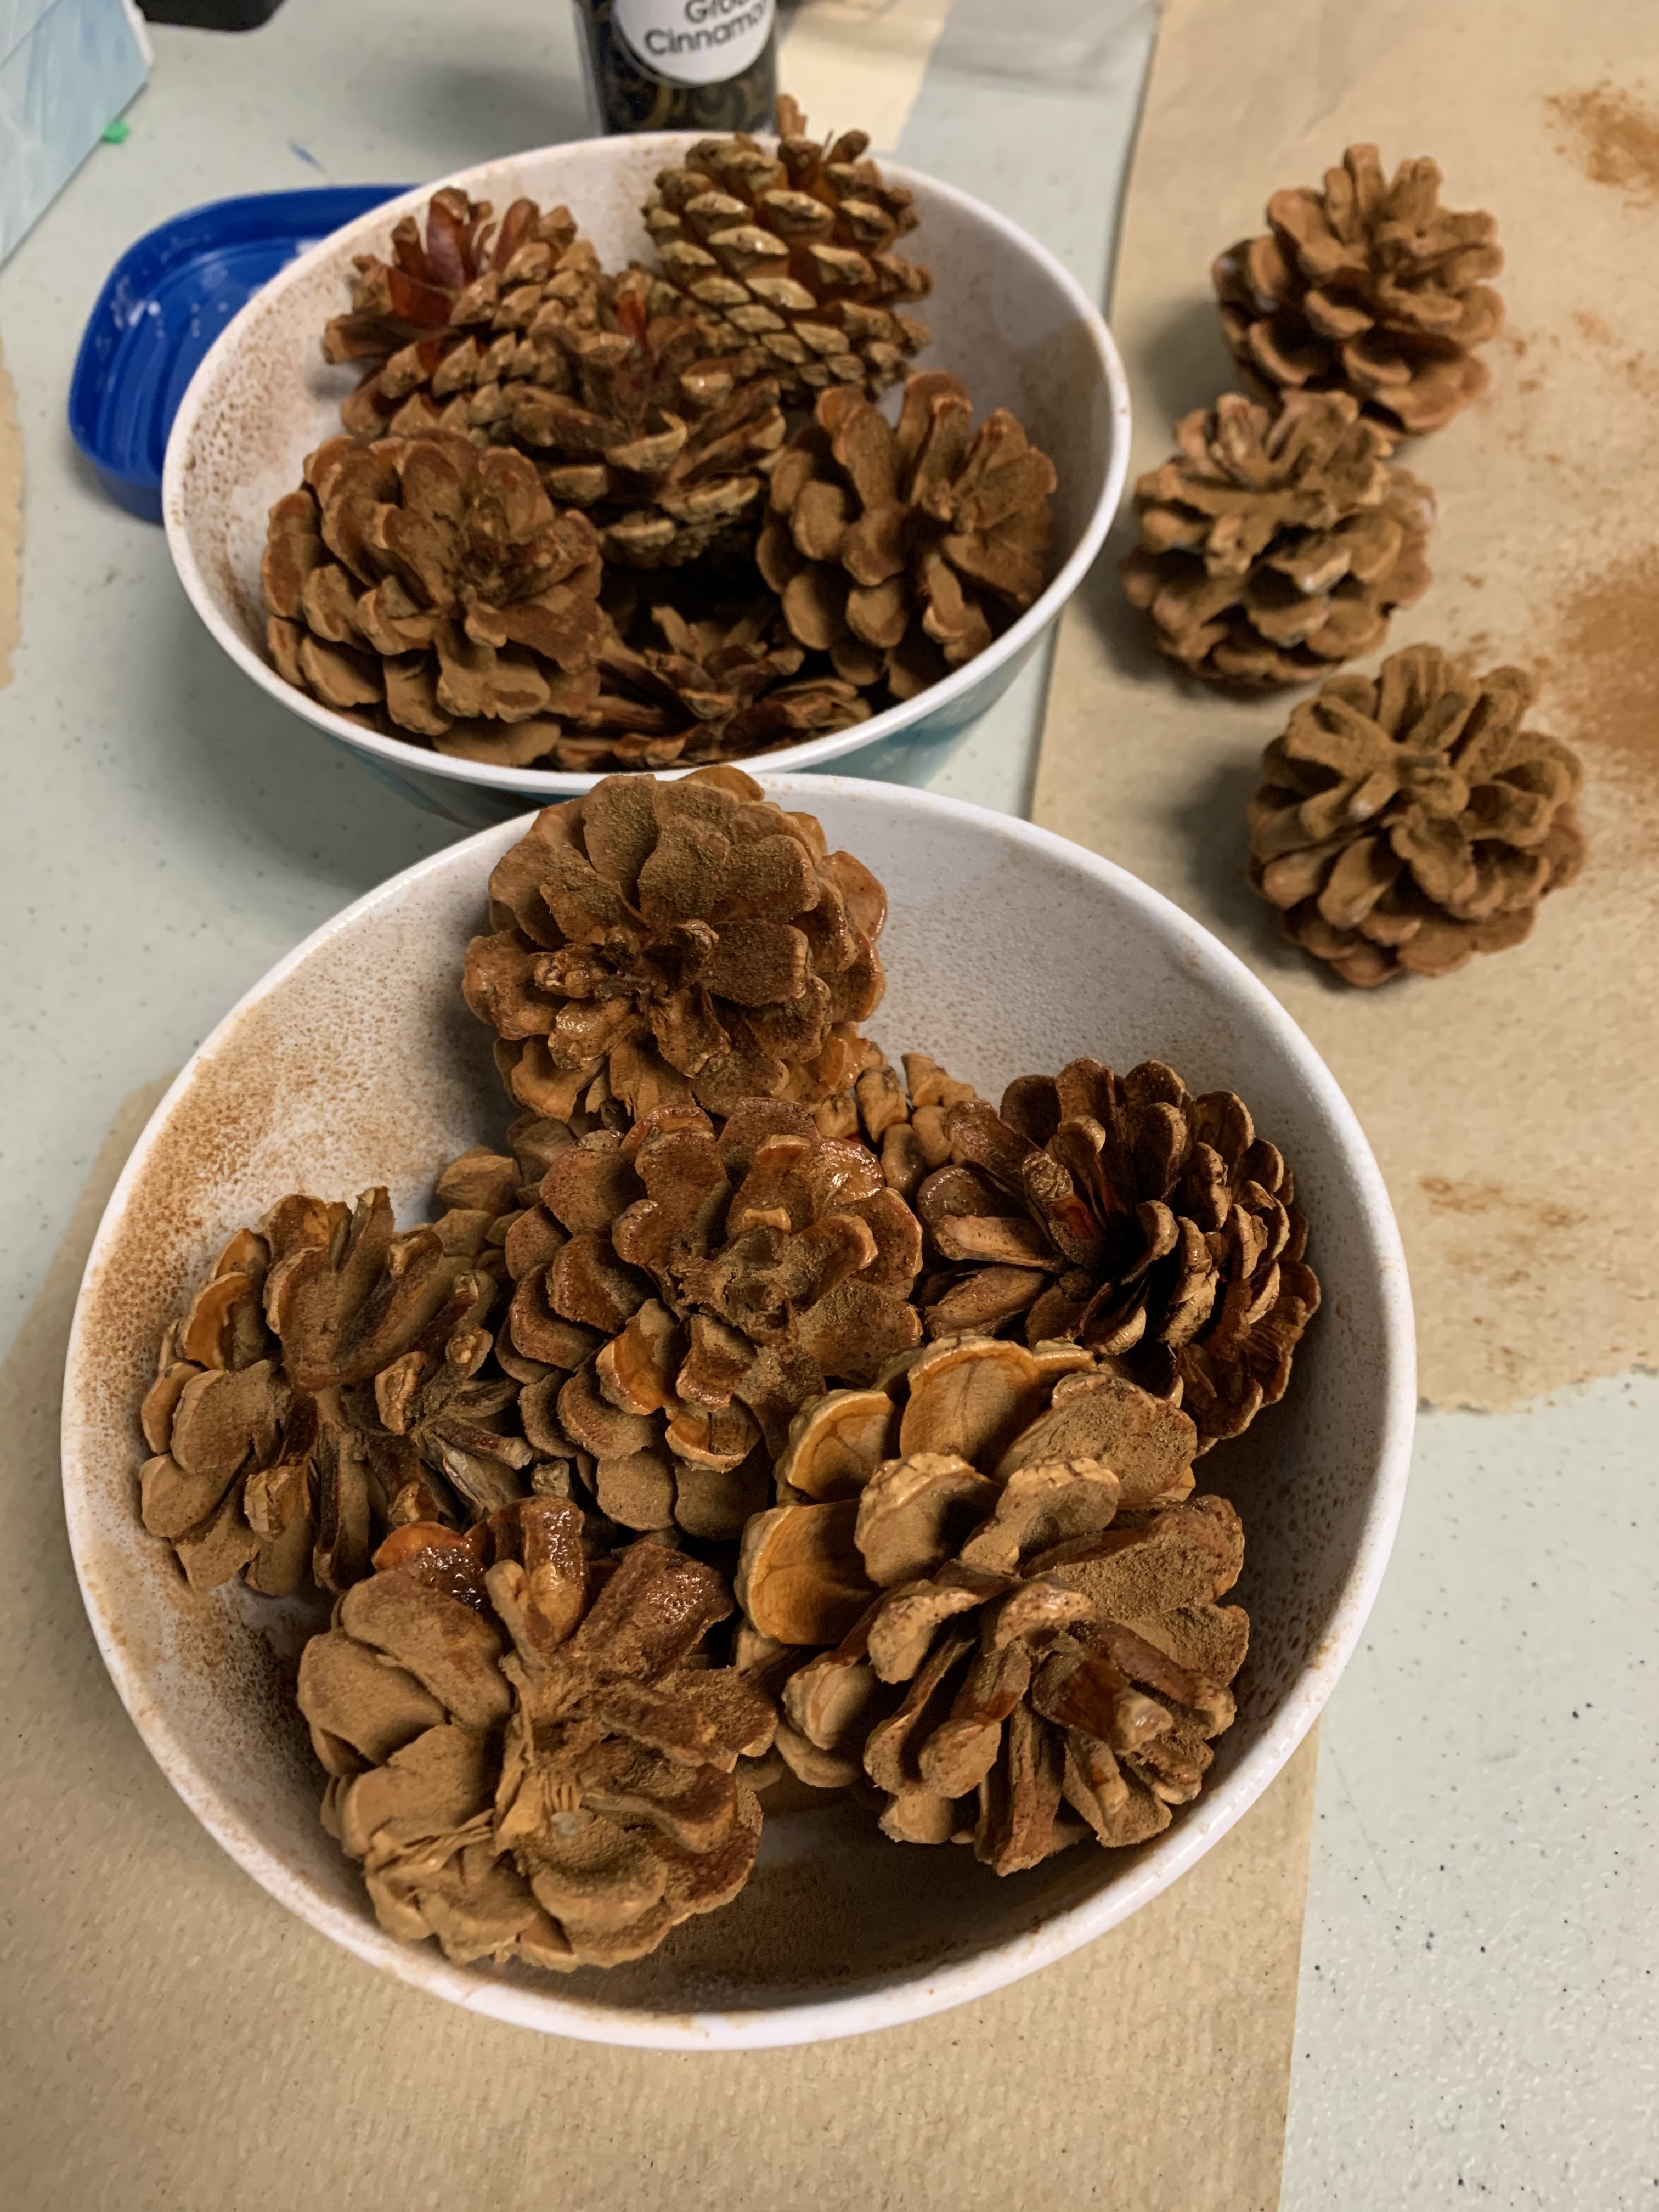 Bowls of pinecones with cinnamon